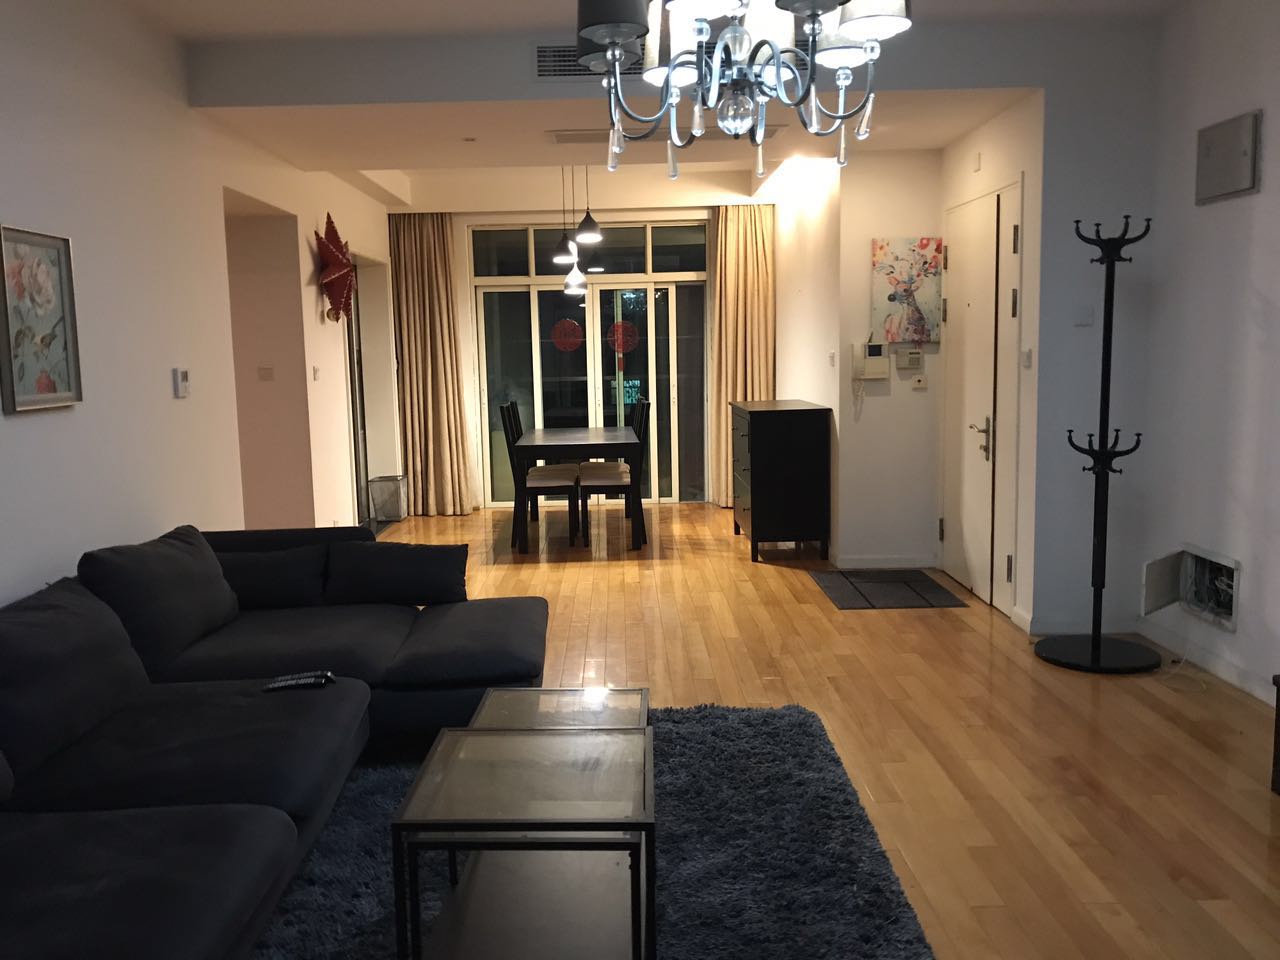 spacious 3br for rent in Shanghai Spacious and well maintained (176sqm) 3bedroom apartment near Nanjing W Rd in Ladoll for rent